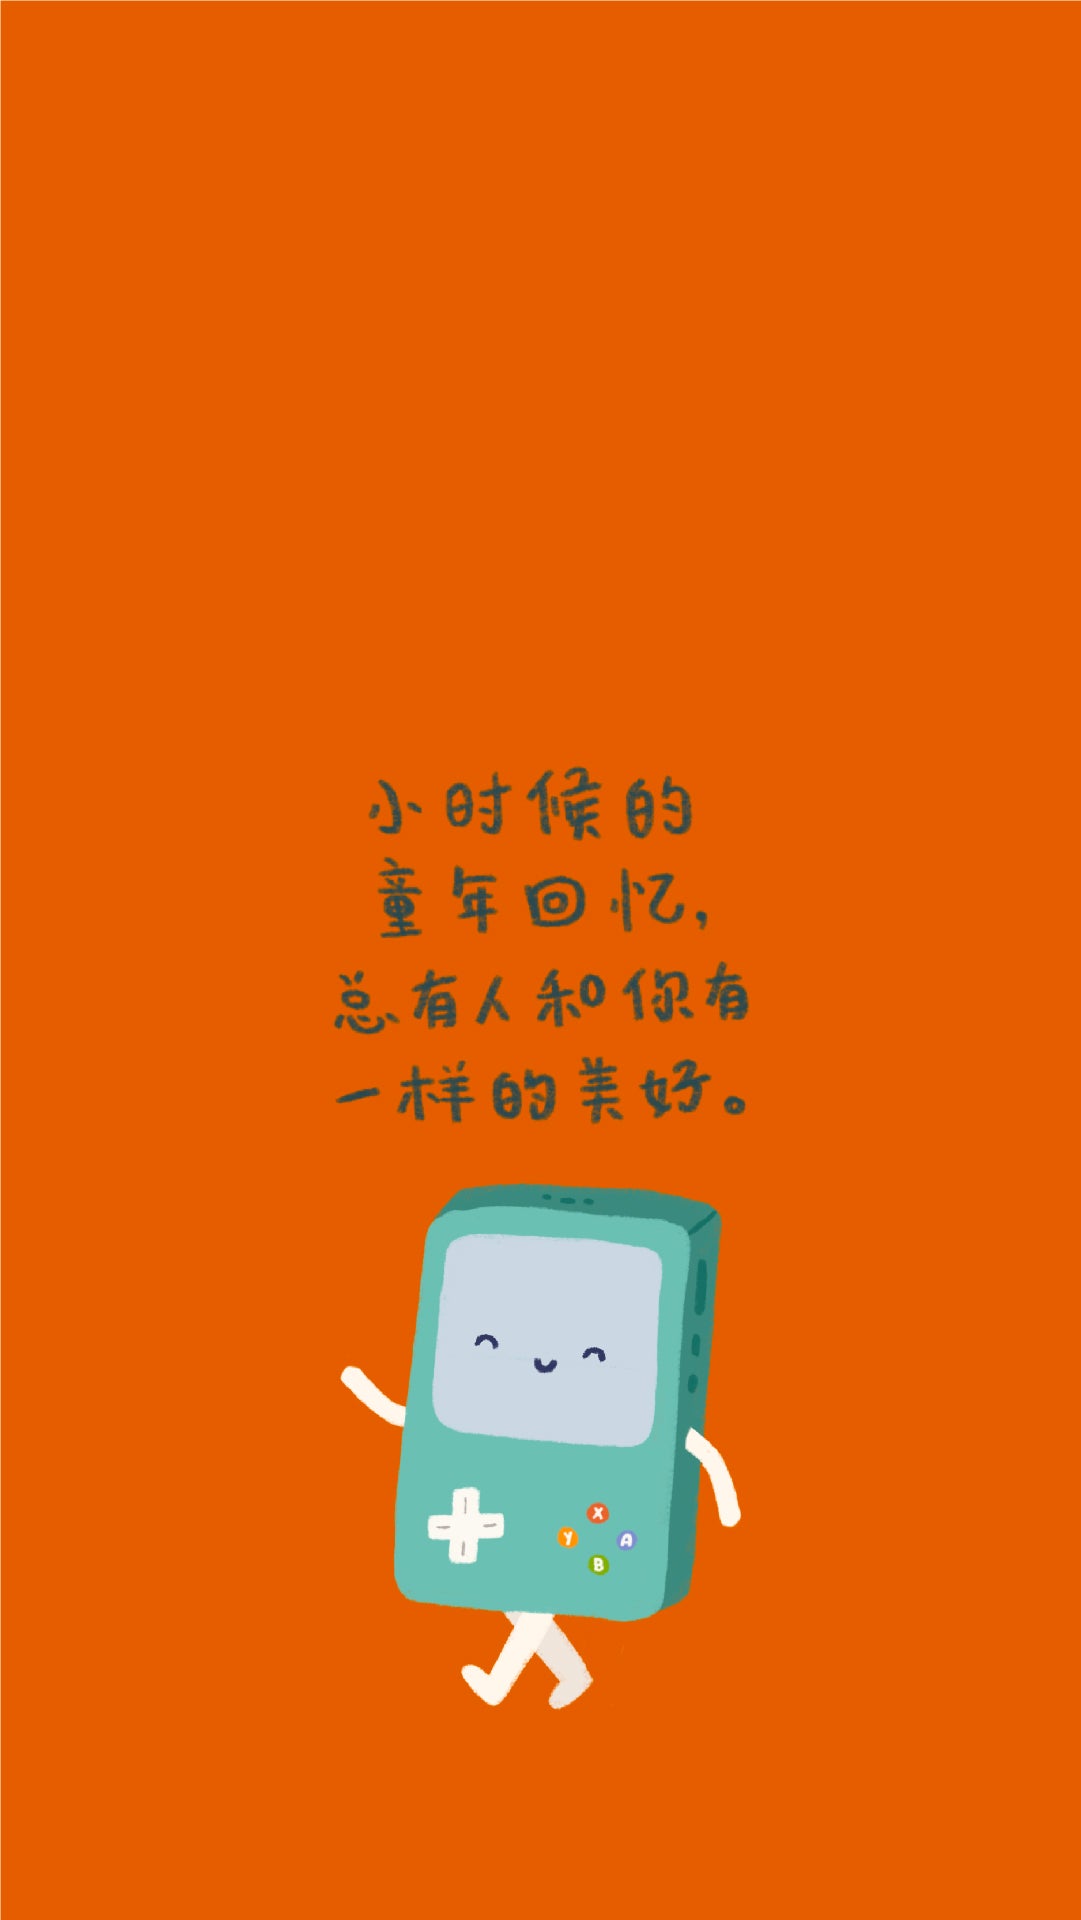 phone wallpaper of a digital illustration of a gameboy and a chinese verse about beautiful childhood memories being pleasant